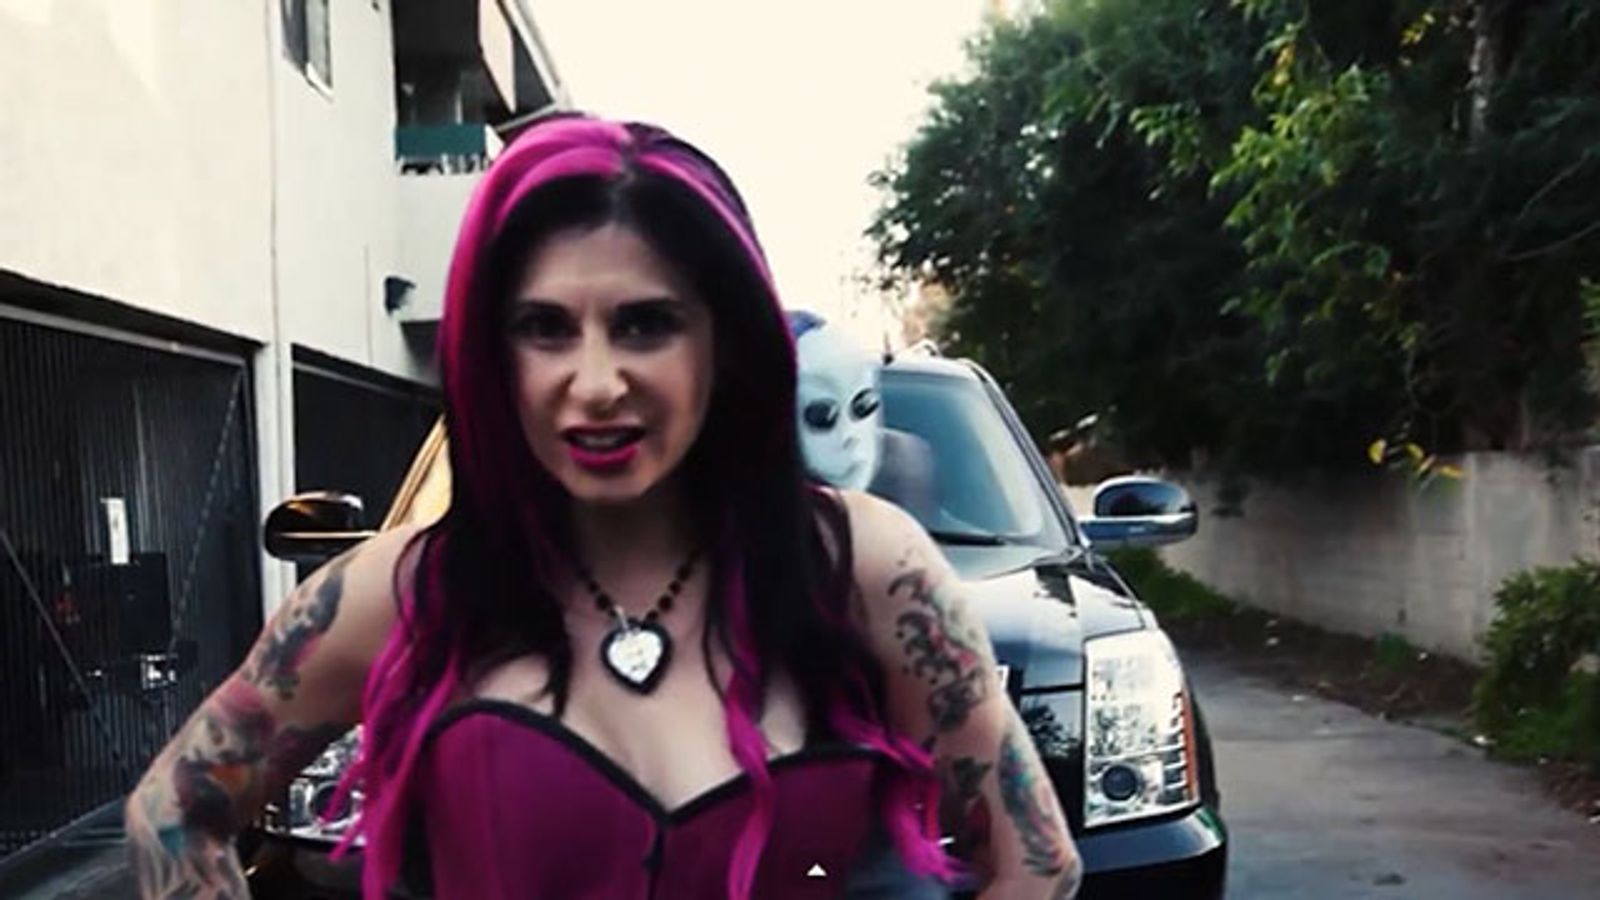 Joanna Angel's "A.LAY.UN" Video Now on YouTube